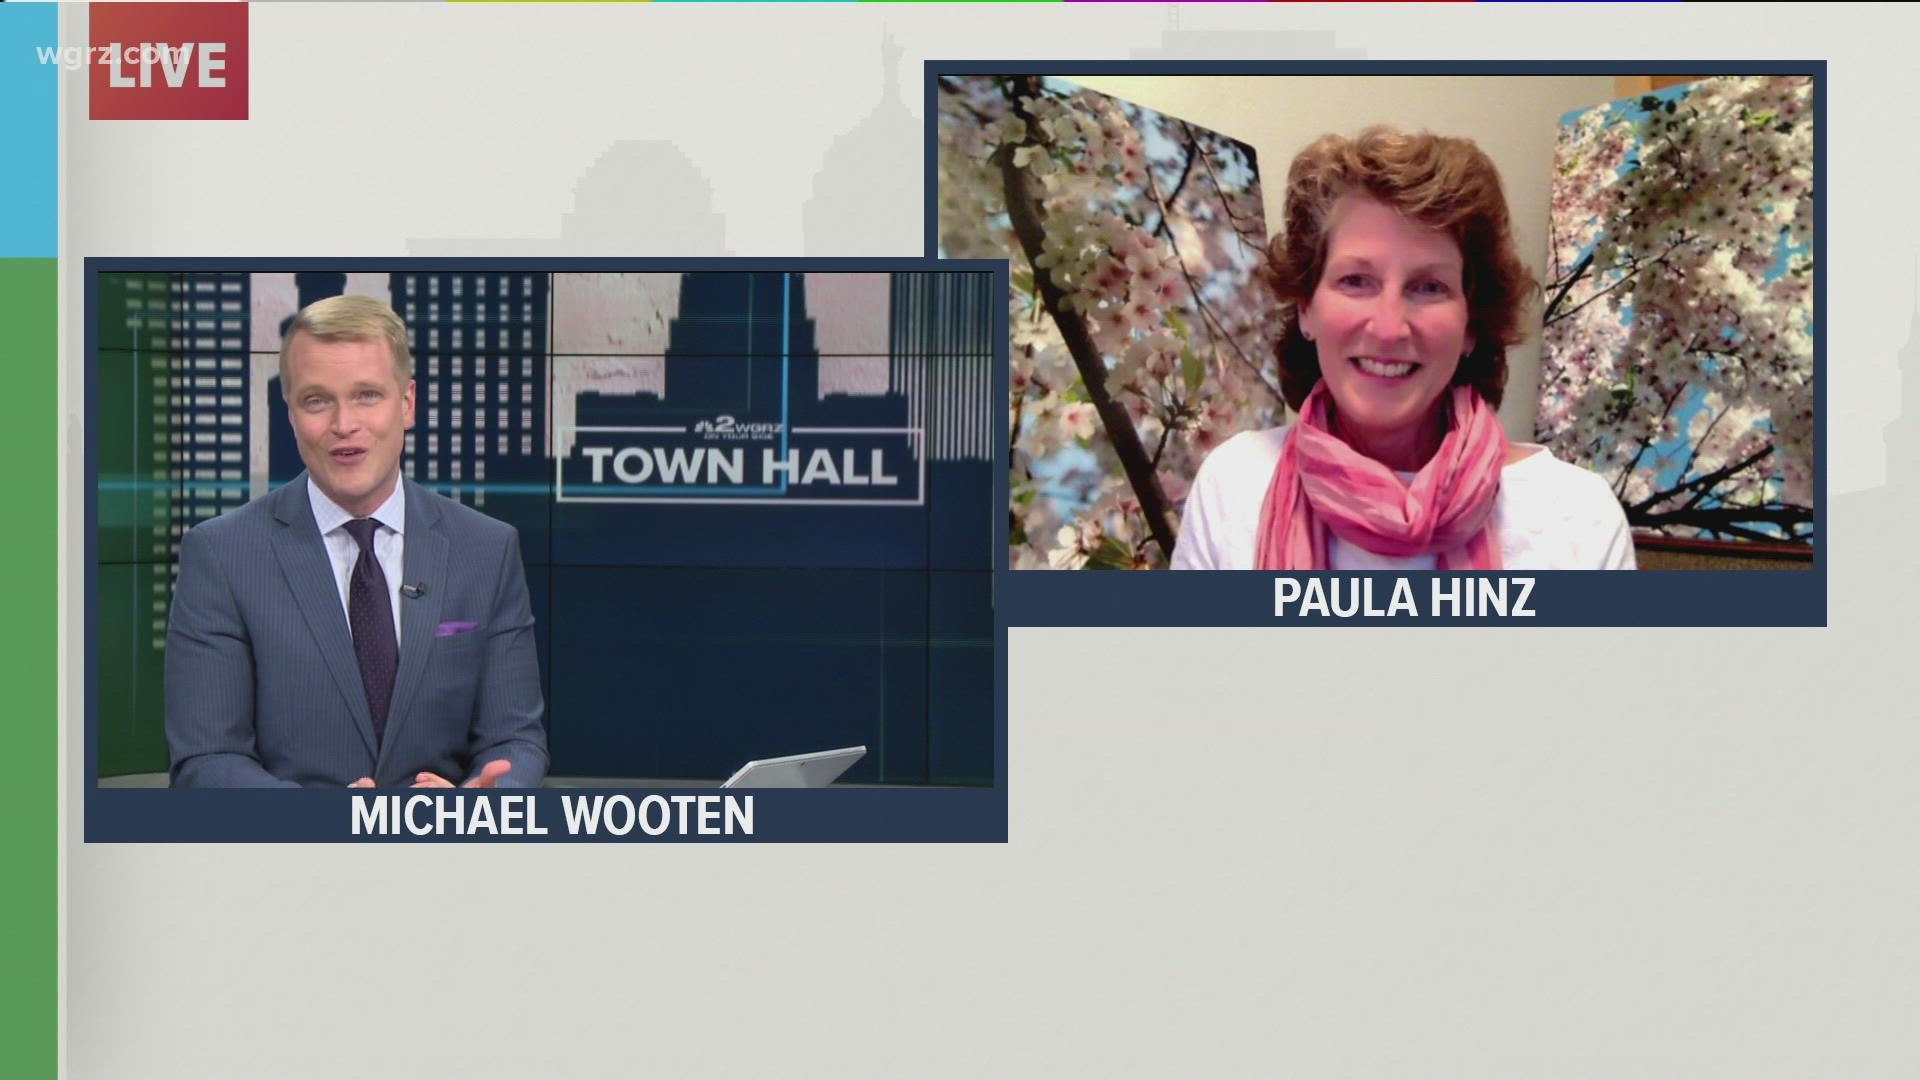 Paula Hinz, co-founder of the Cherry Blossom Festival, joined our town hall to discuss the weekend event here in Buffalo.